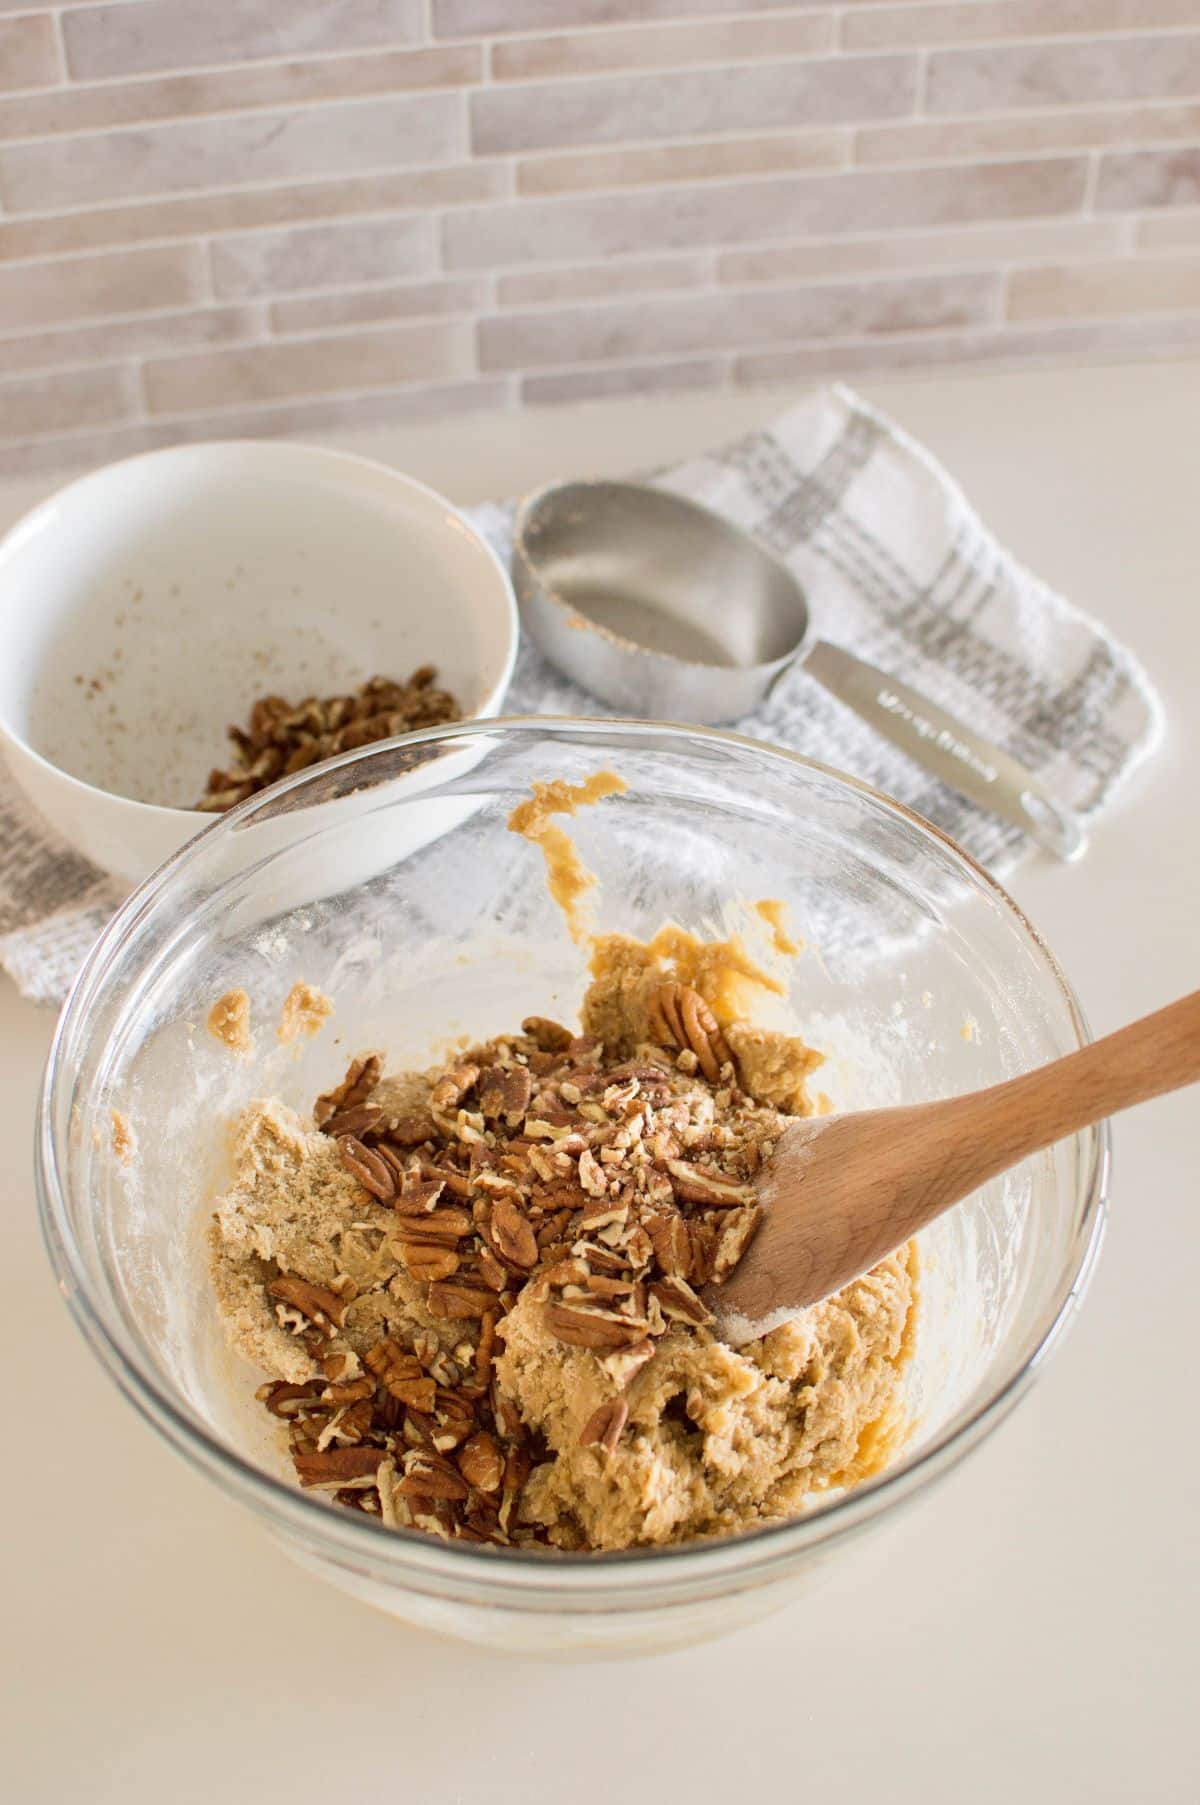 Cookie batter and pecans in a mixing bowl with wooden spoon in it.